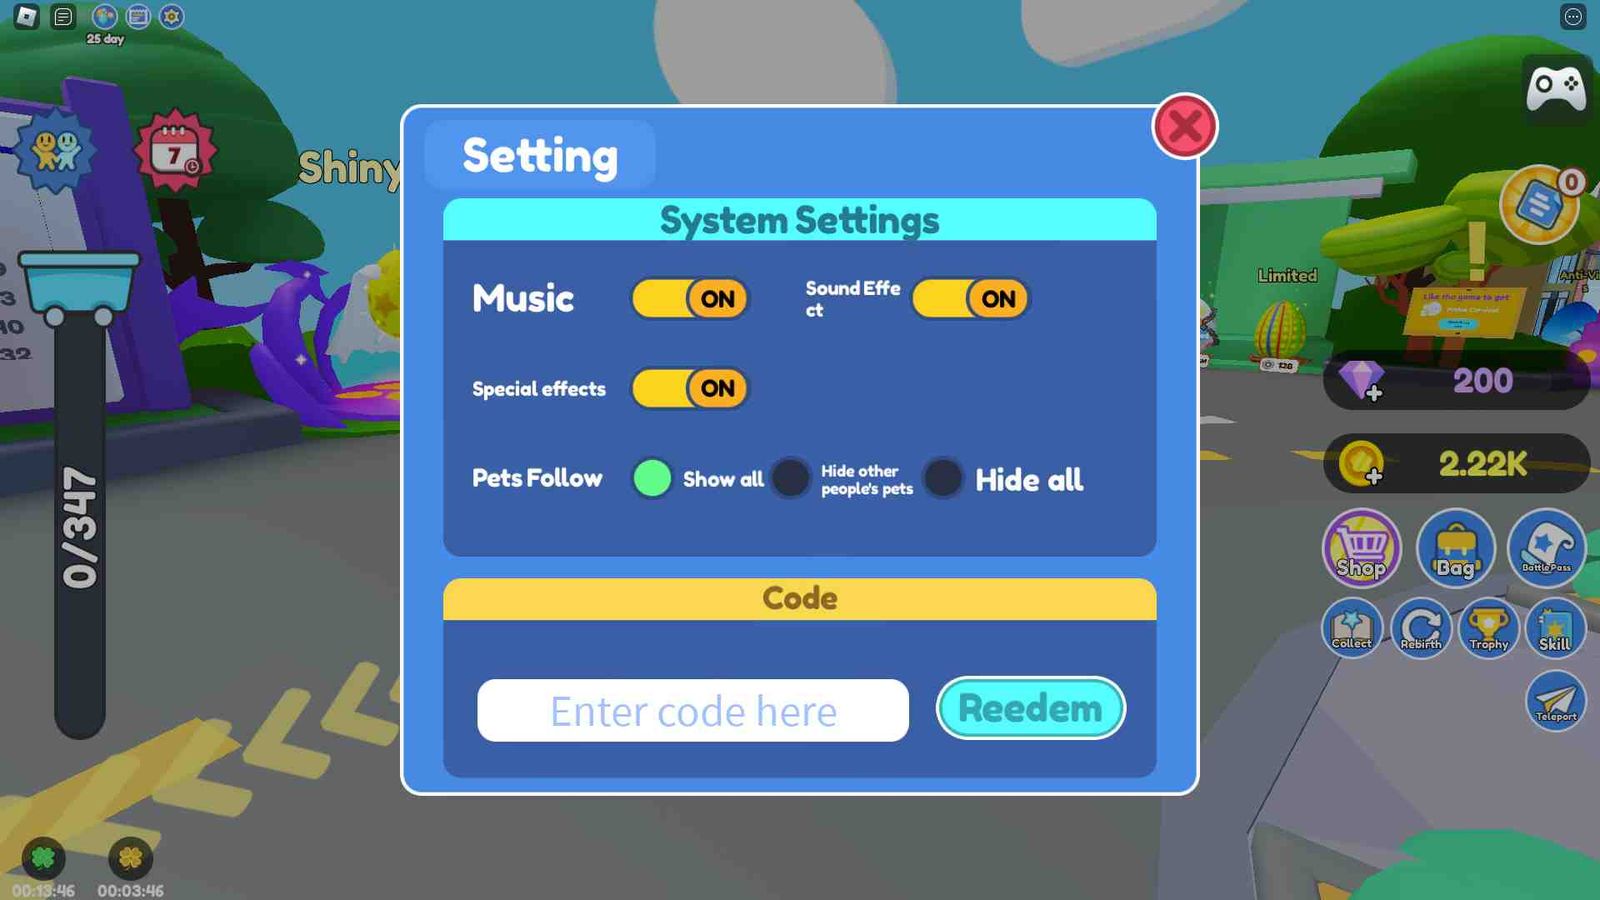 Image of the code redemption page in Stone Miner Simulator 2.